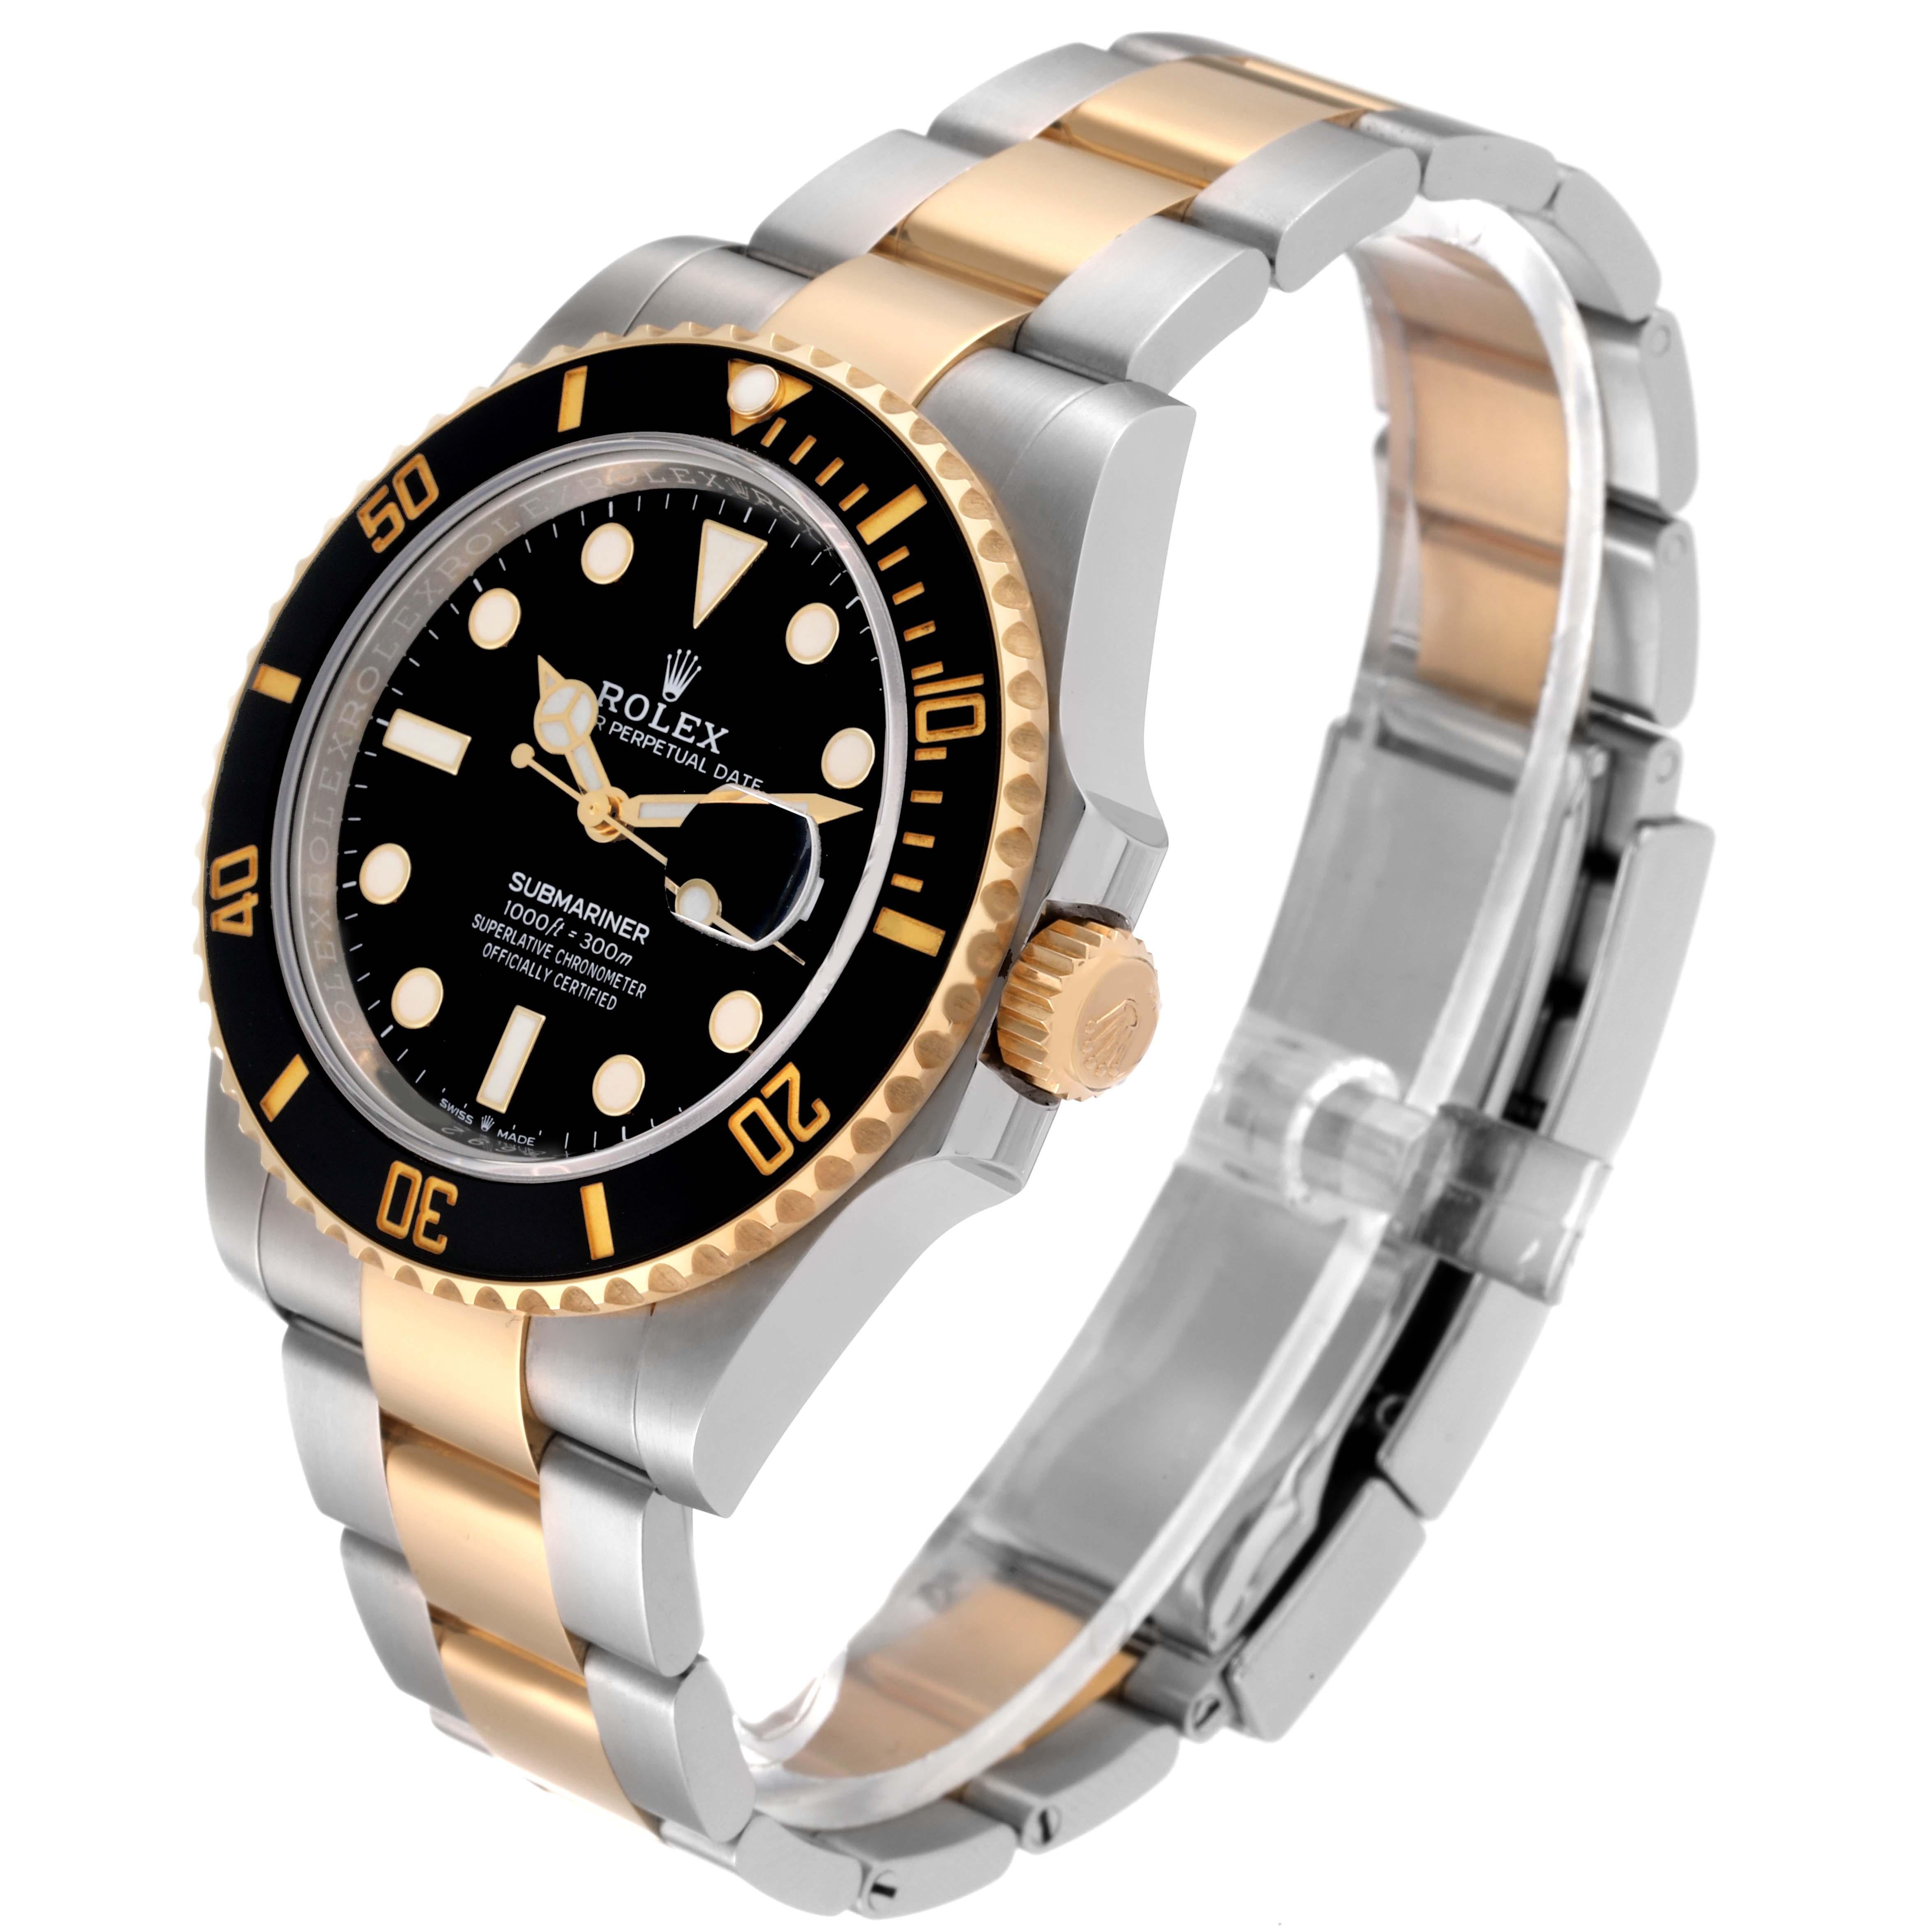 Rolex Submariner 41 Steel Yellow Gold Black Dial Mens Watch 126613 Box Card In Excellent Condition For Sale In Atlanta, GA